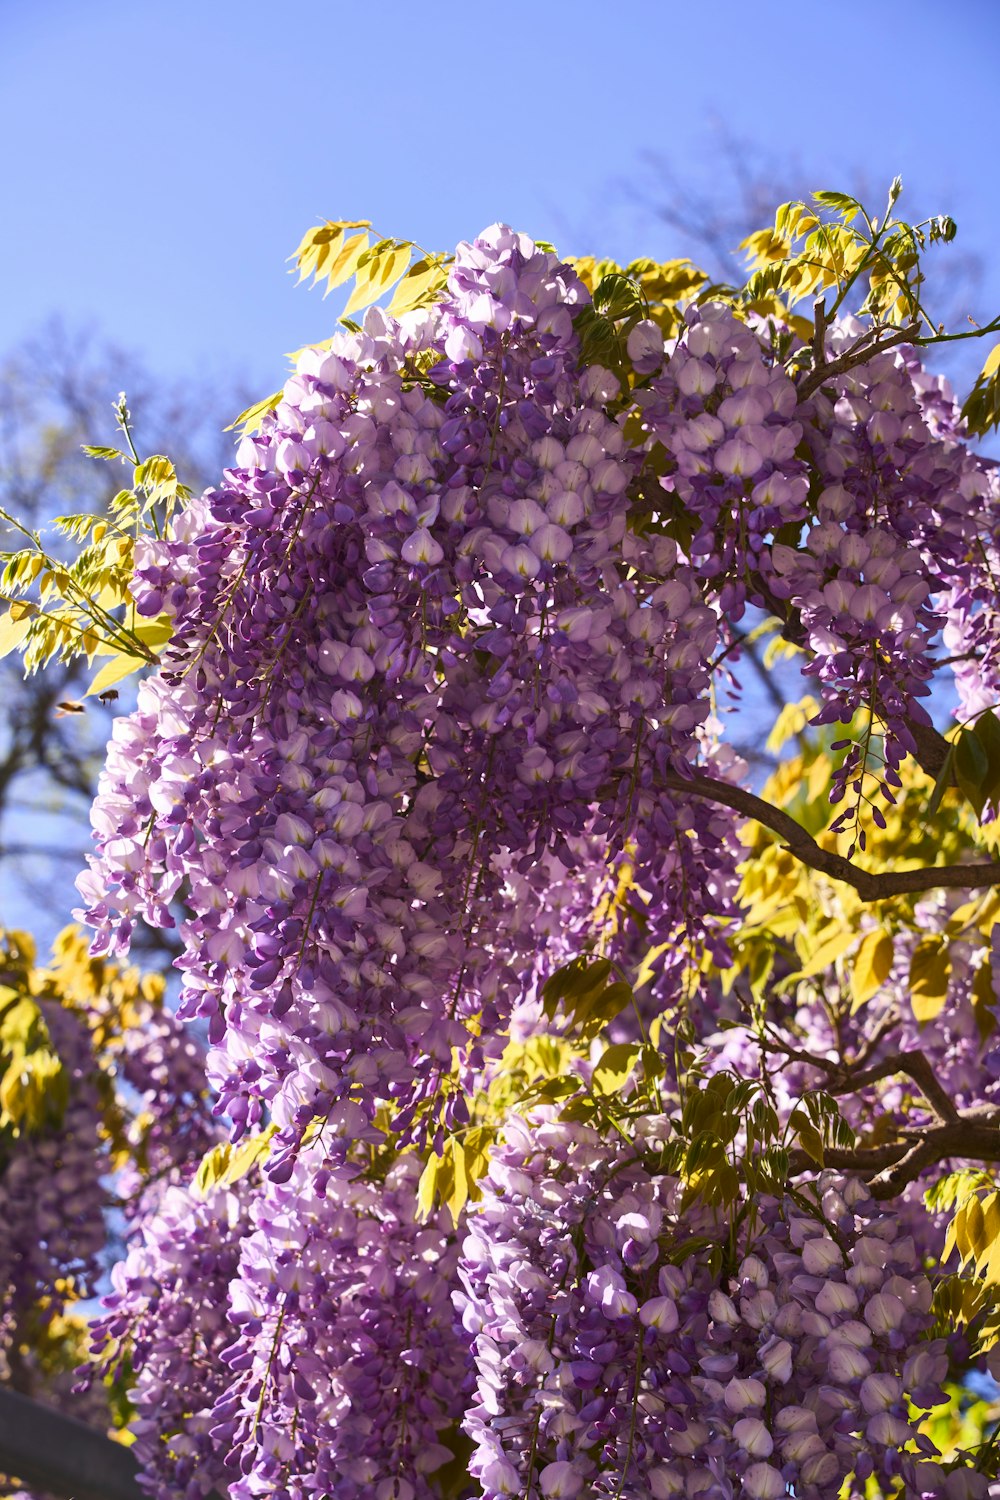 purple flowers blooming on a tree in the sun